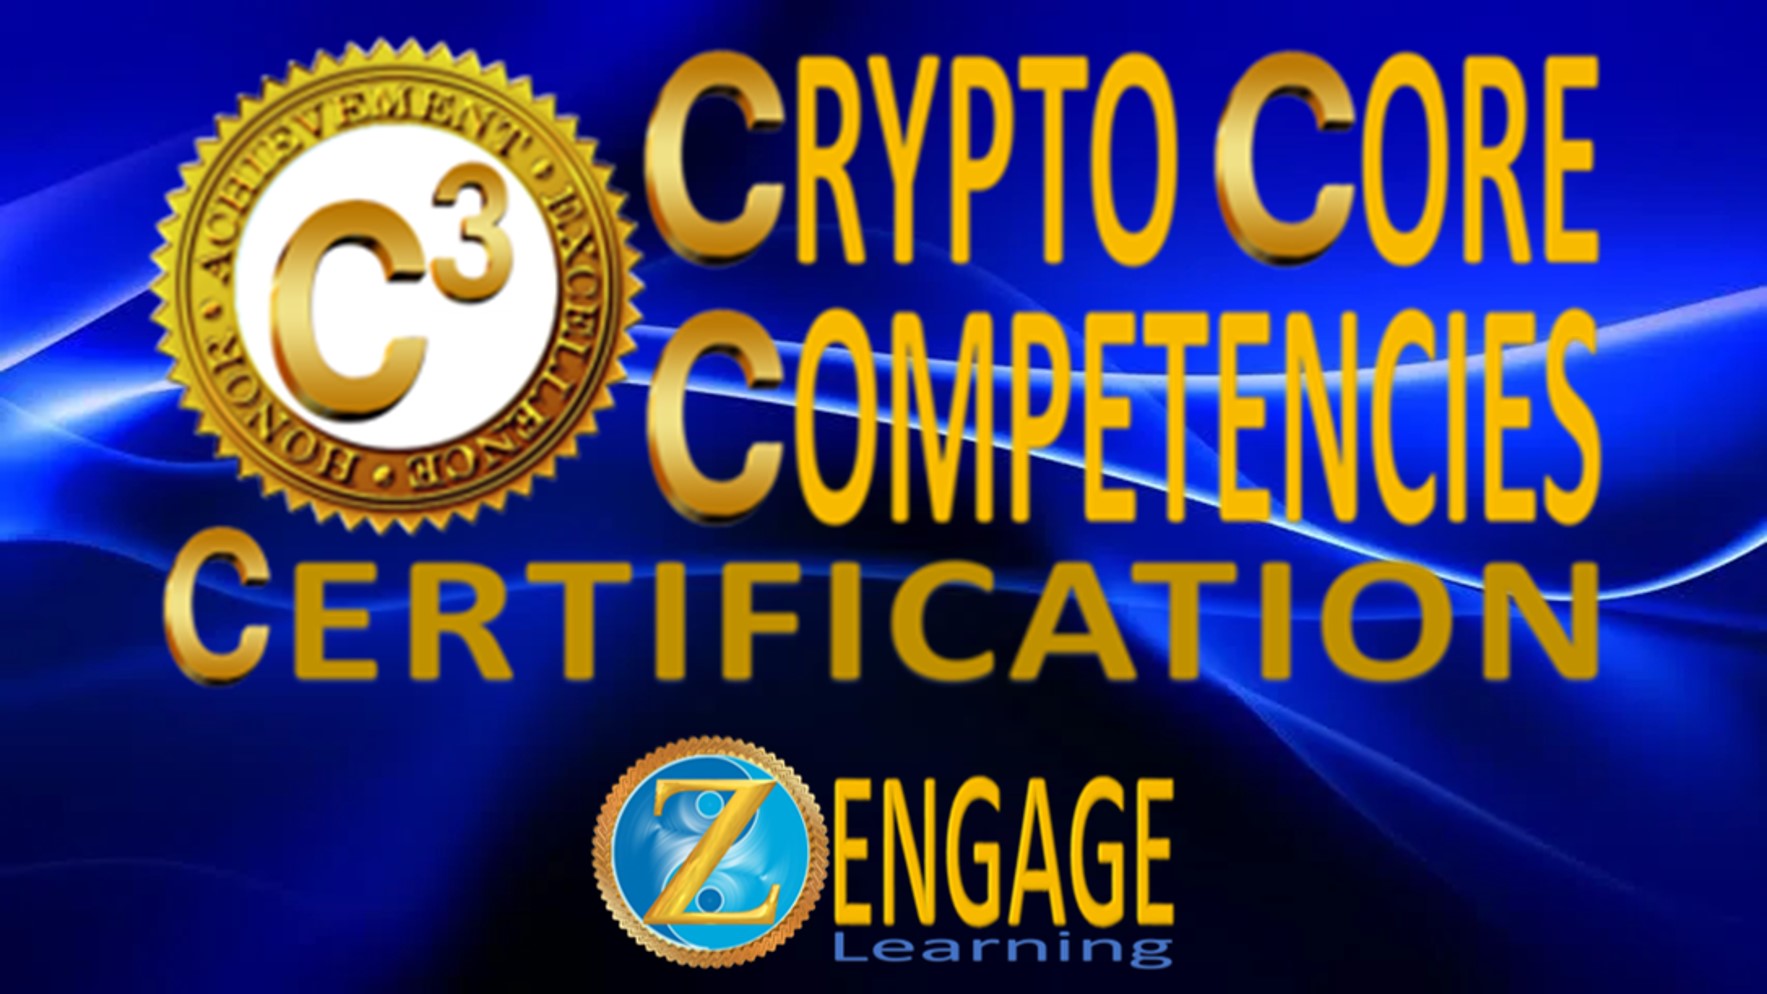 Cryptocurrency Core Competencies - Personal Development and Career Advancement